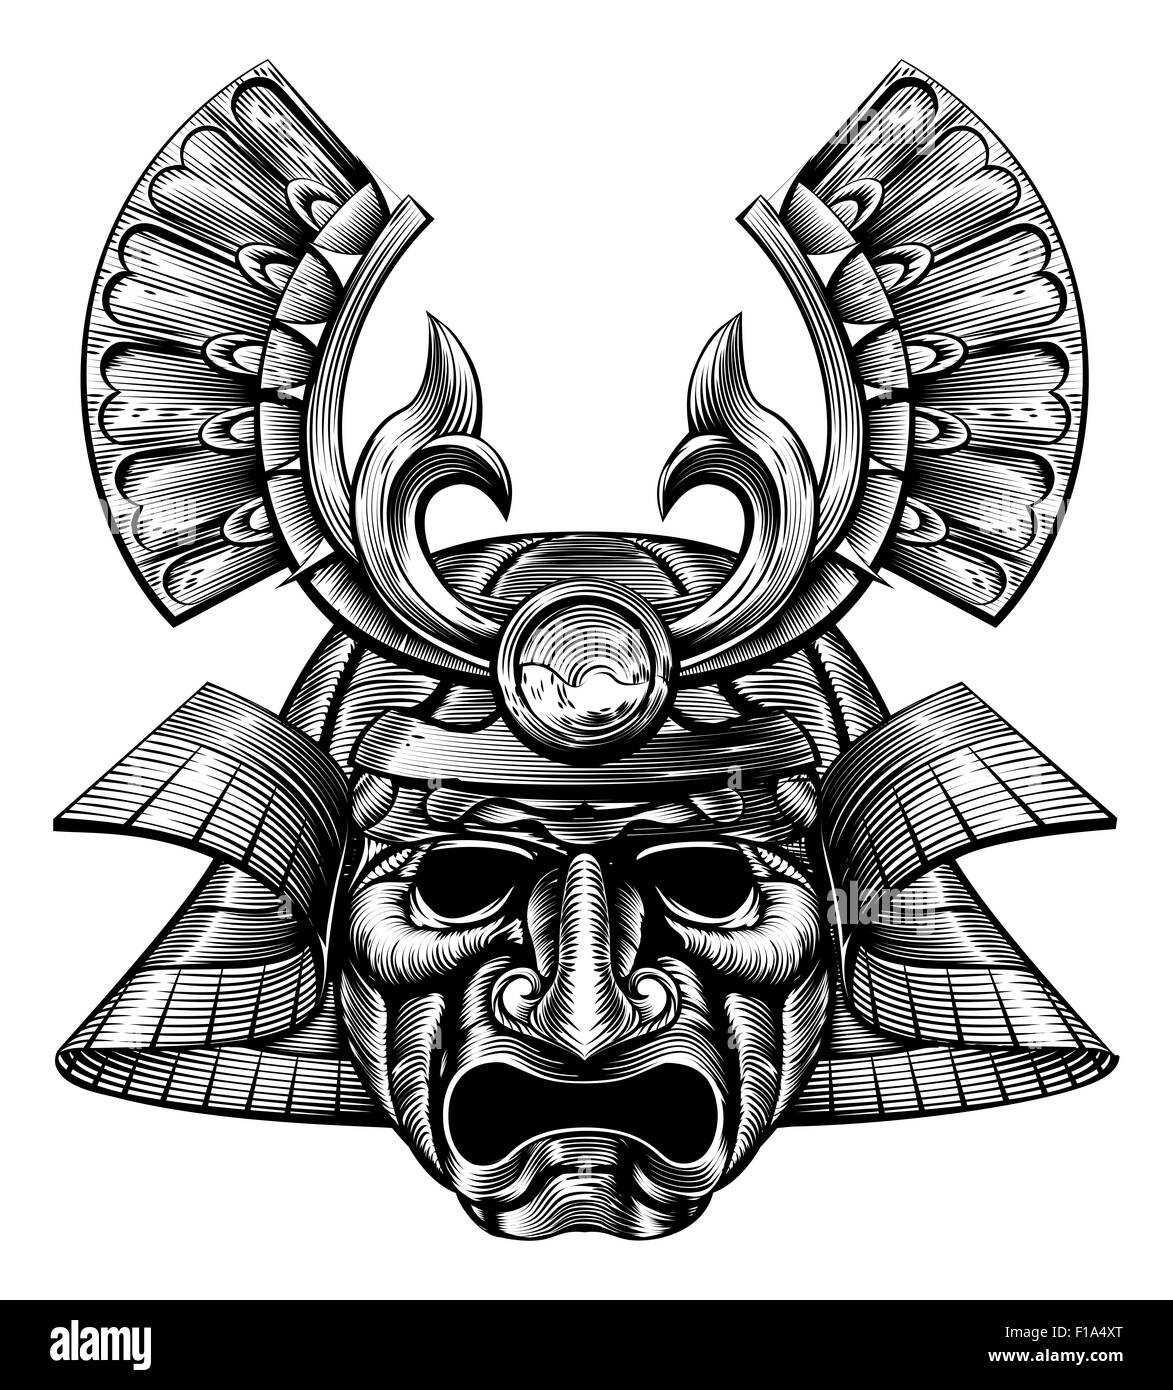 An original illustration of a samurai mask and helmet in a vintage woodblock style Stock Photo